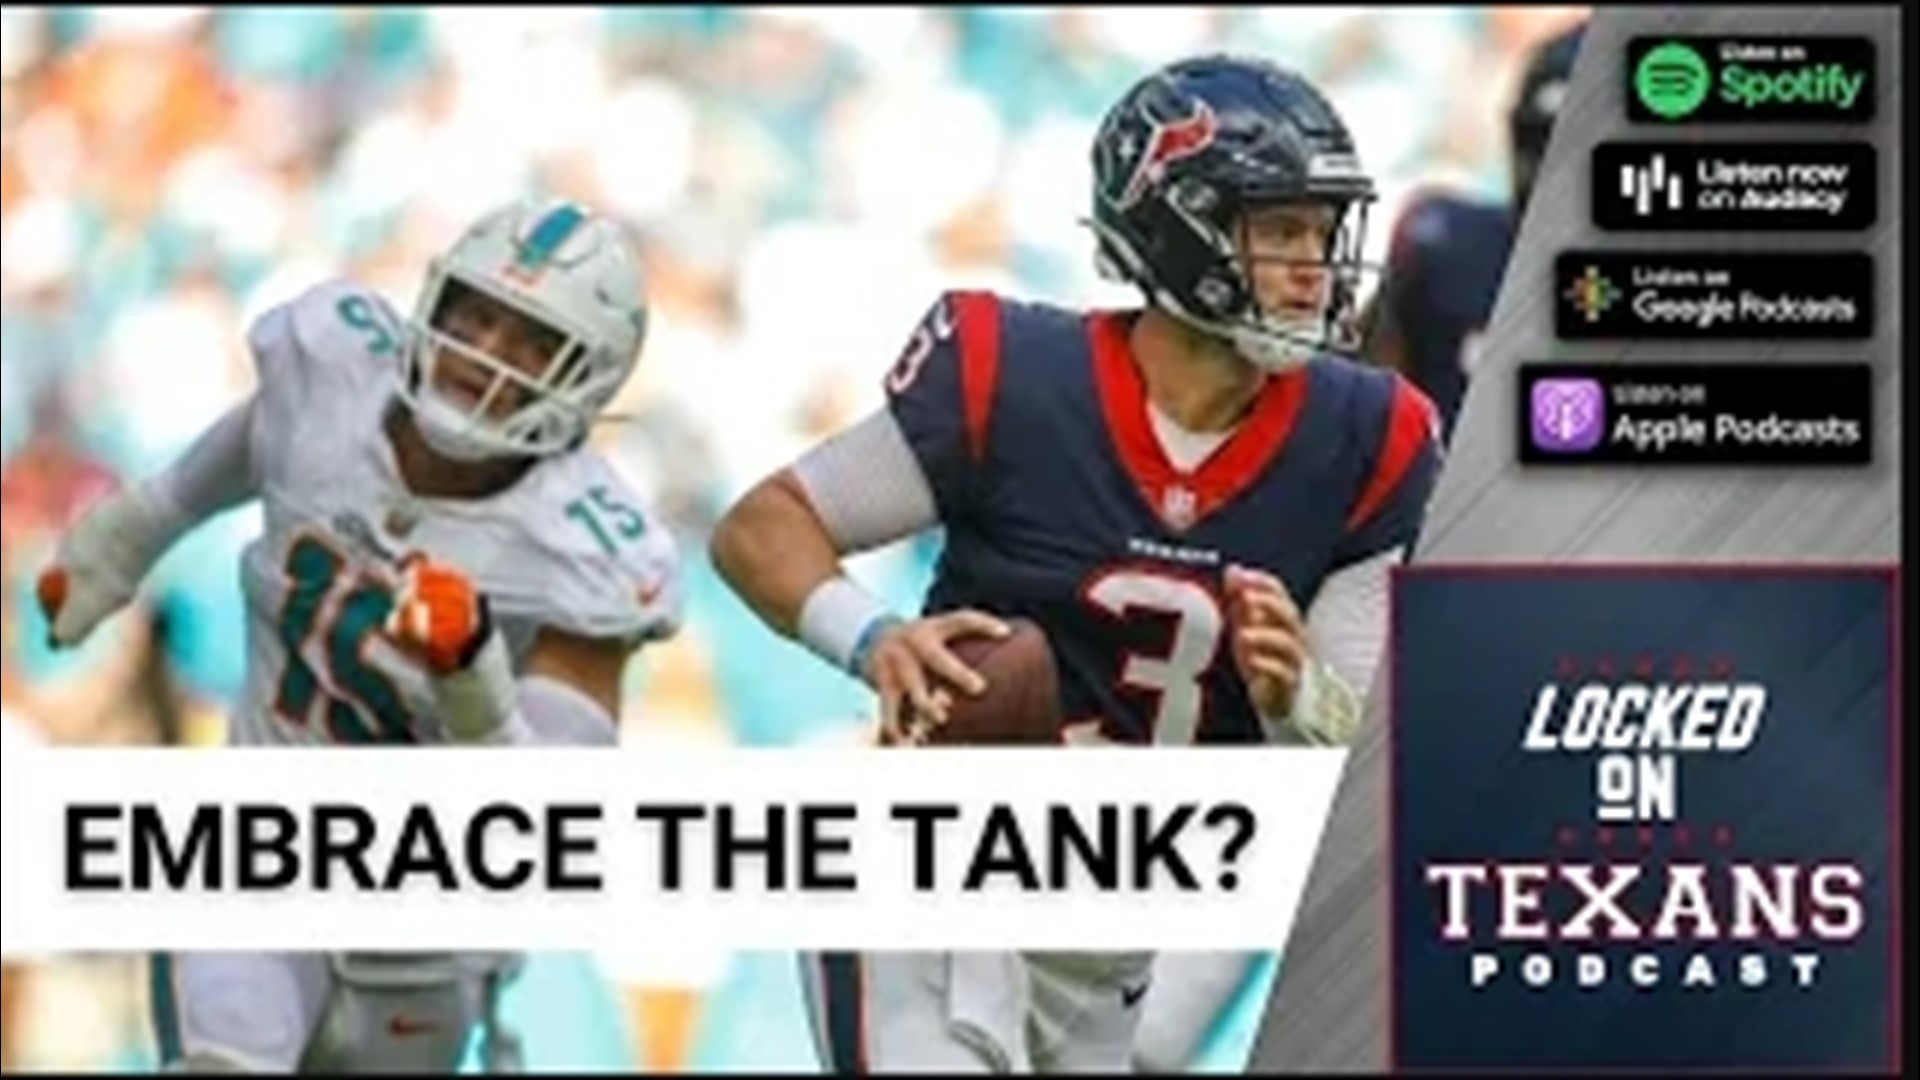 After another disappointing loss to the Dolphins, is it time to admit that the Houston Texans have accepted the tank?